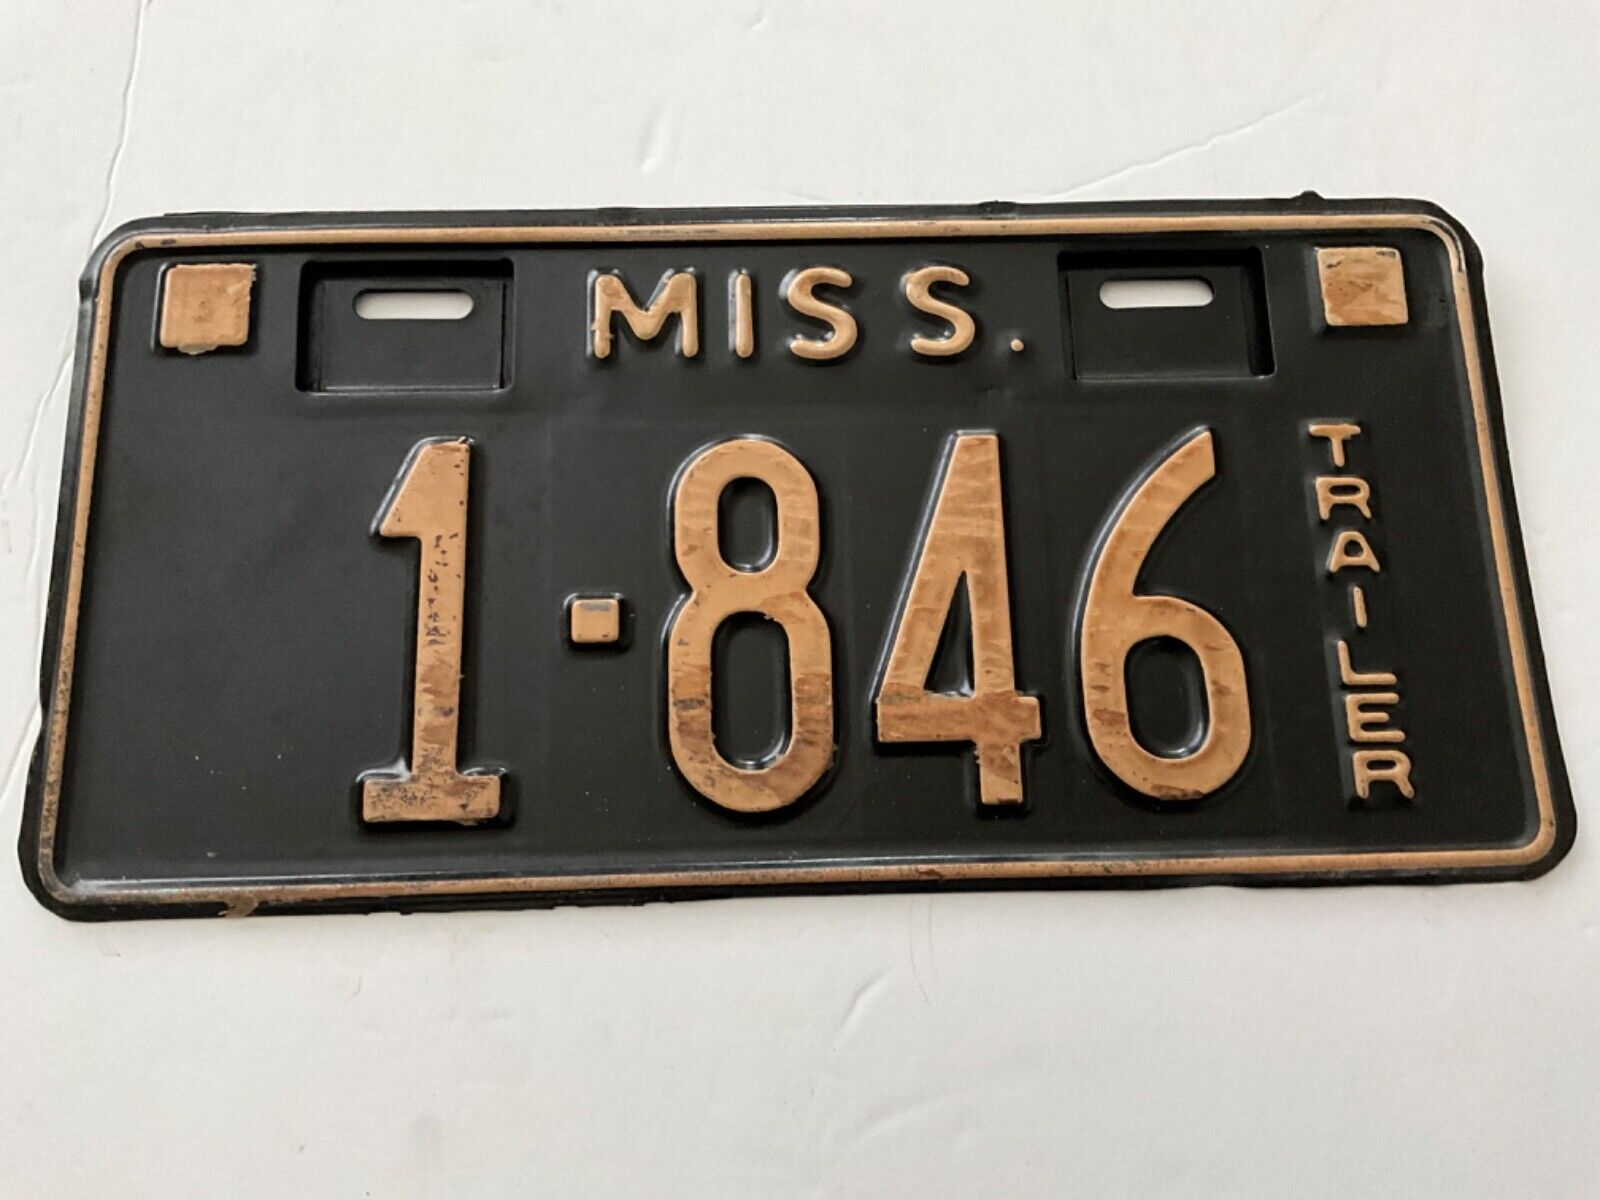 1934 1936 Mississippi Trailer License Plate Tag 1-846 with envelope